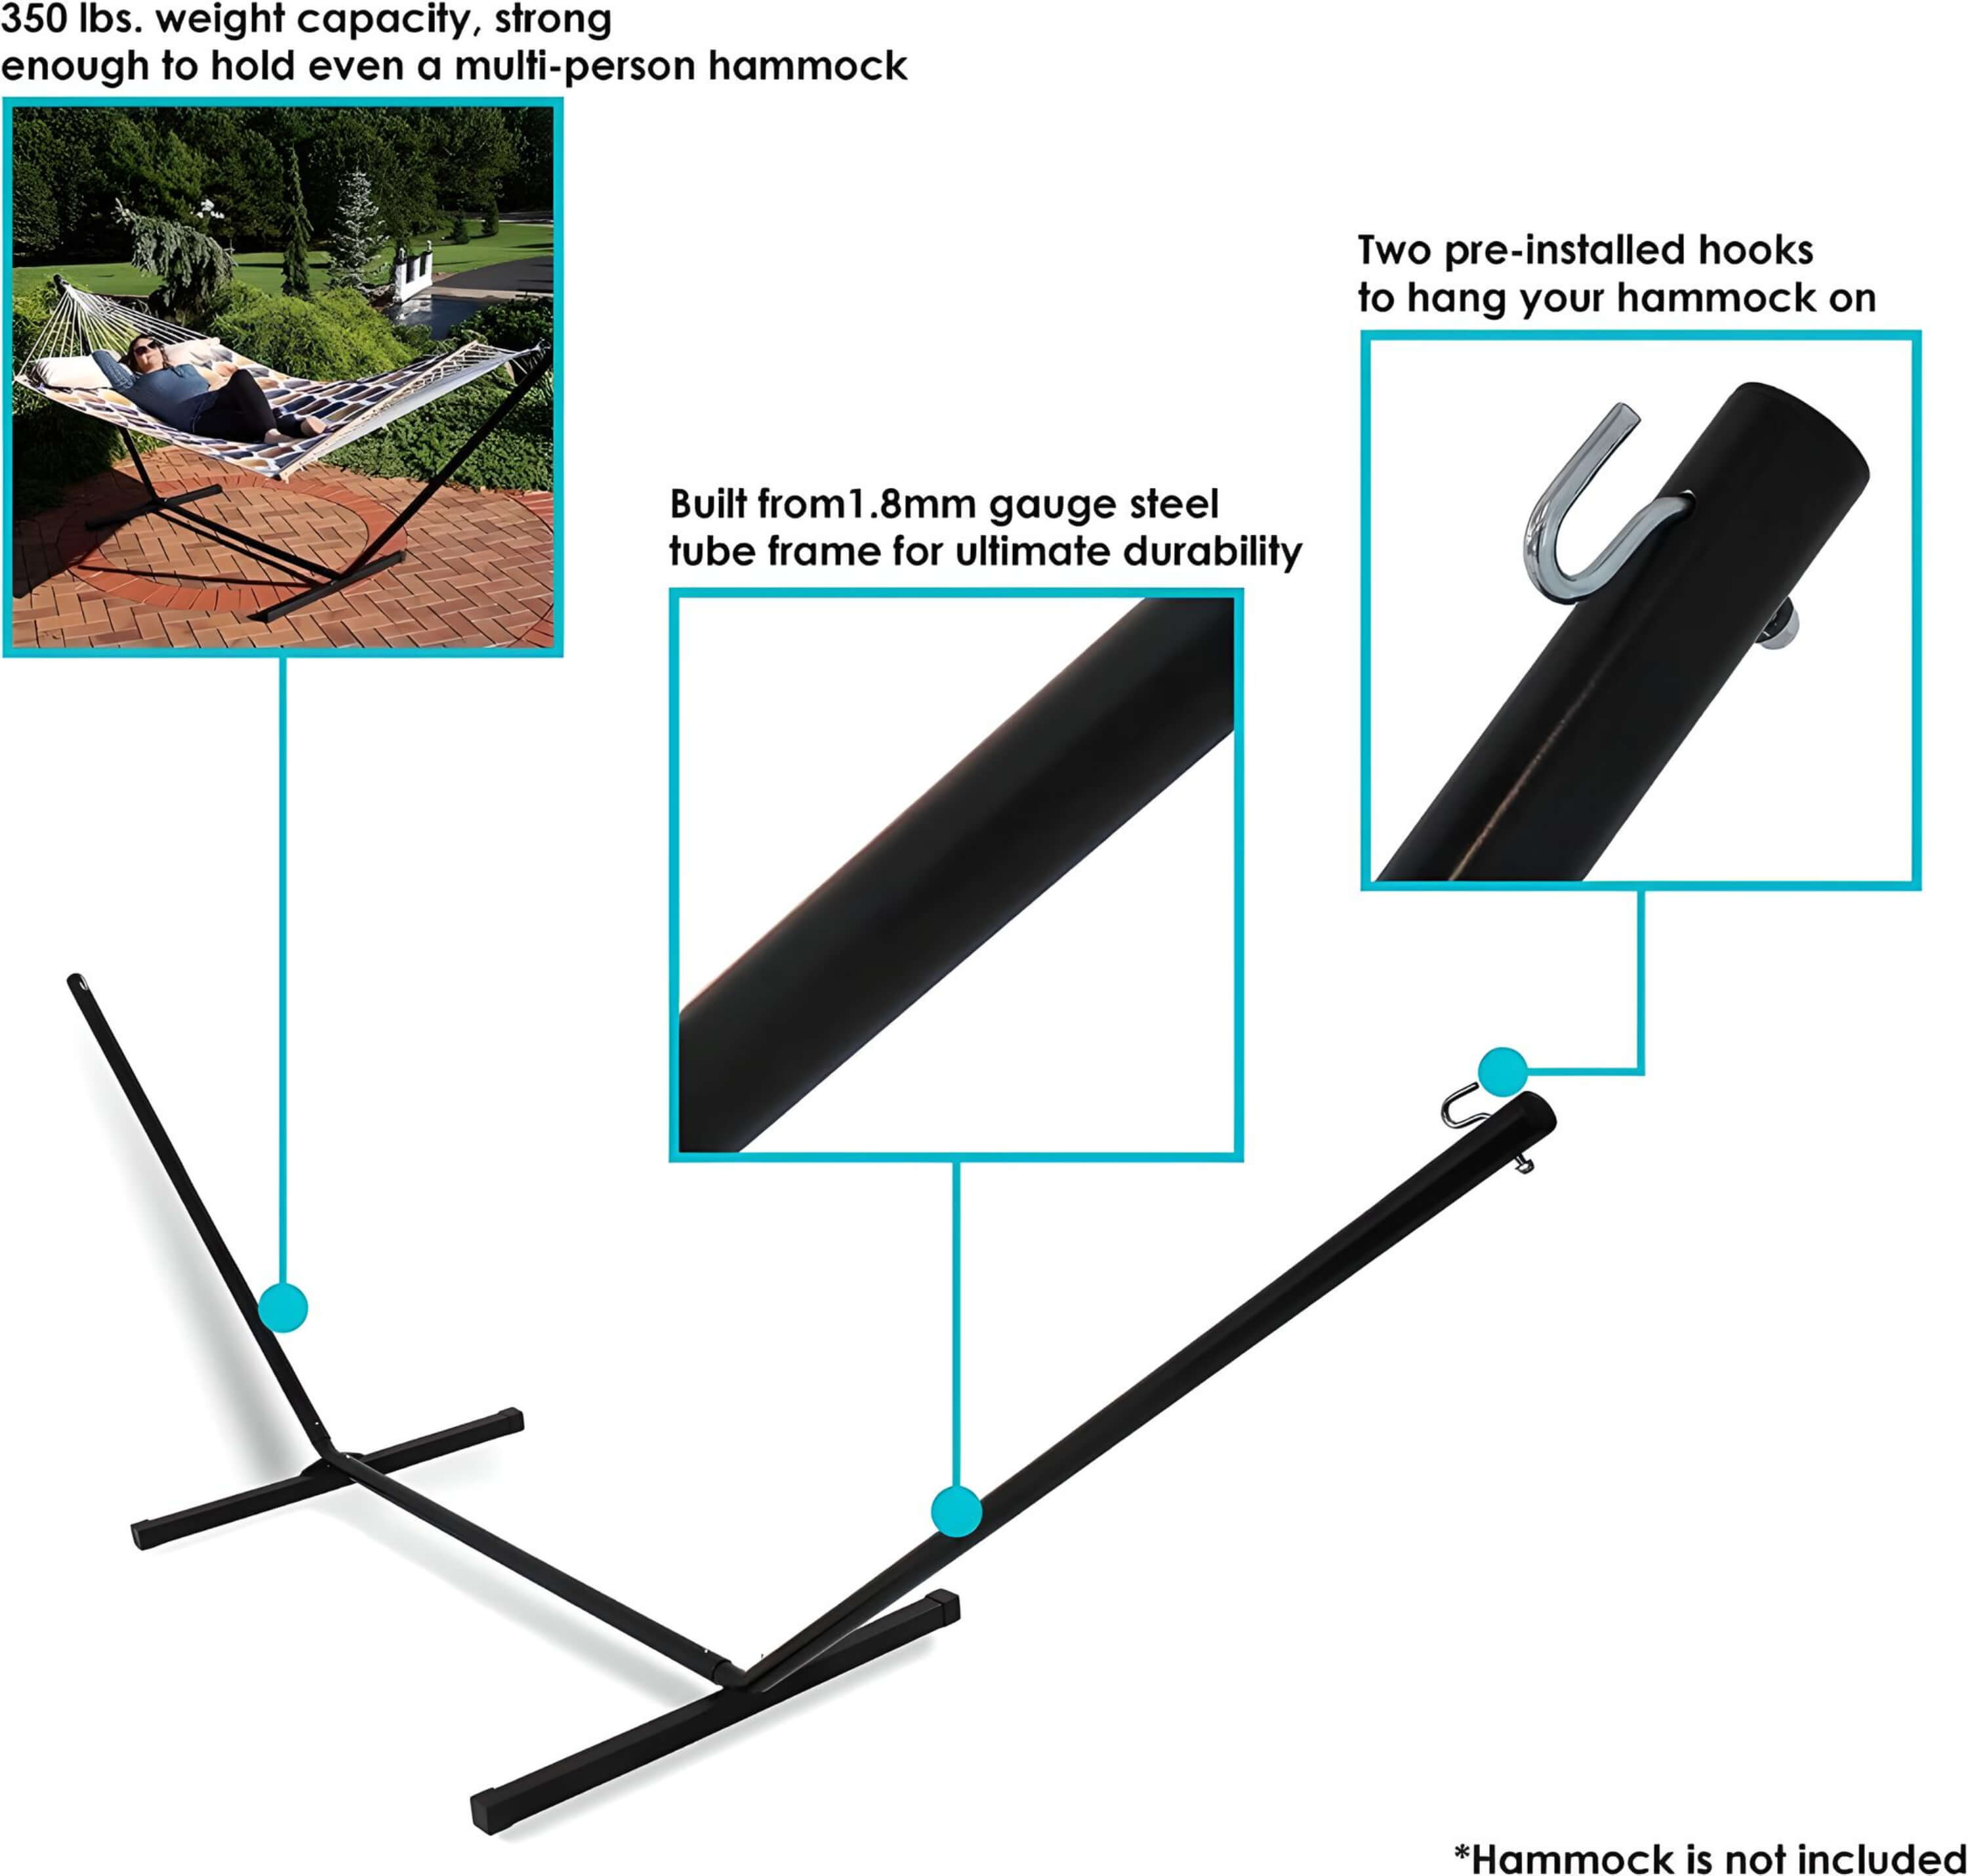 durabolity-of-steel-stand-for-hammock